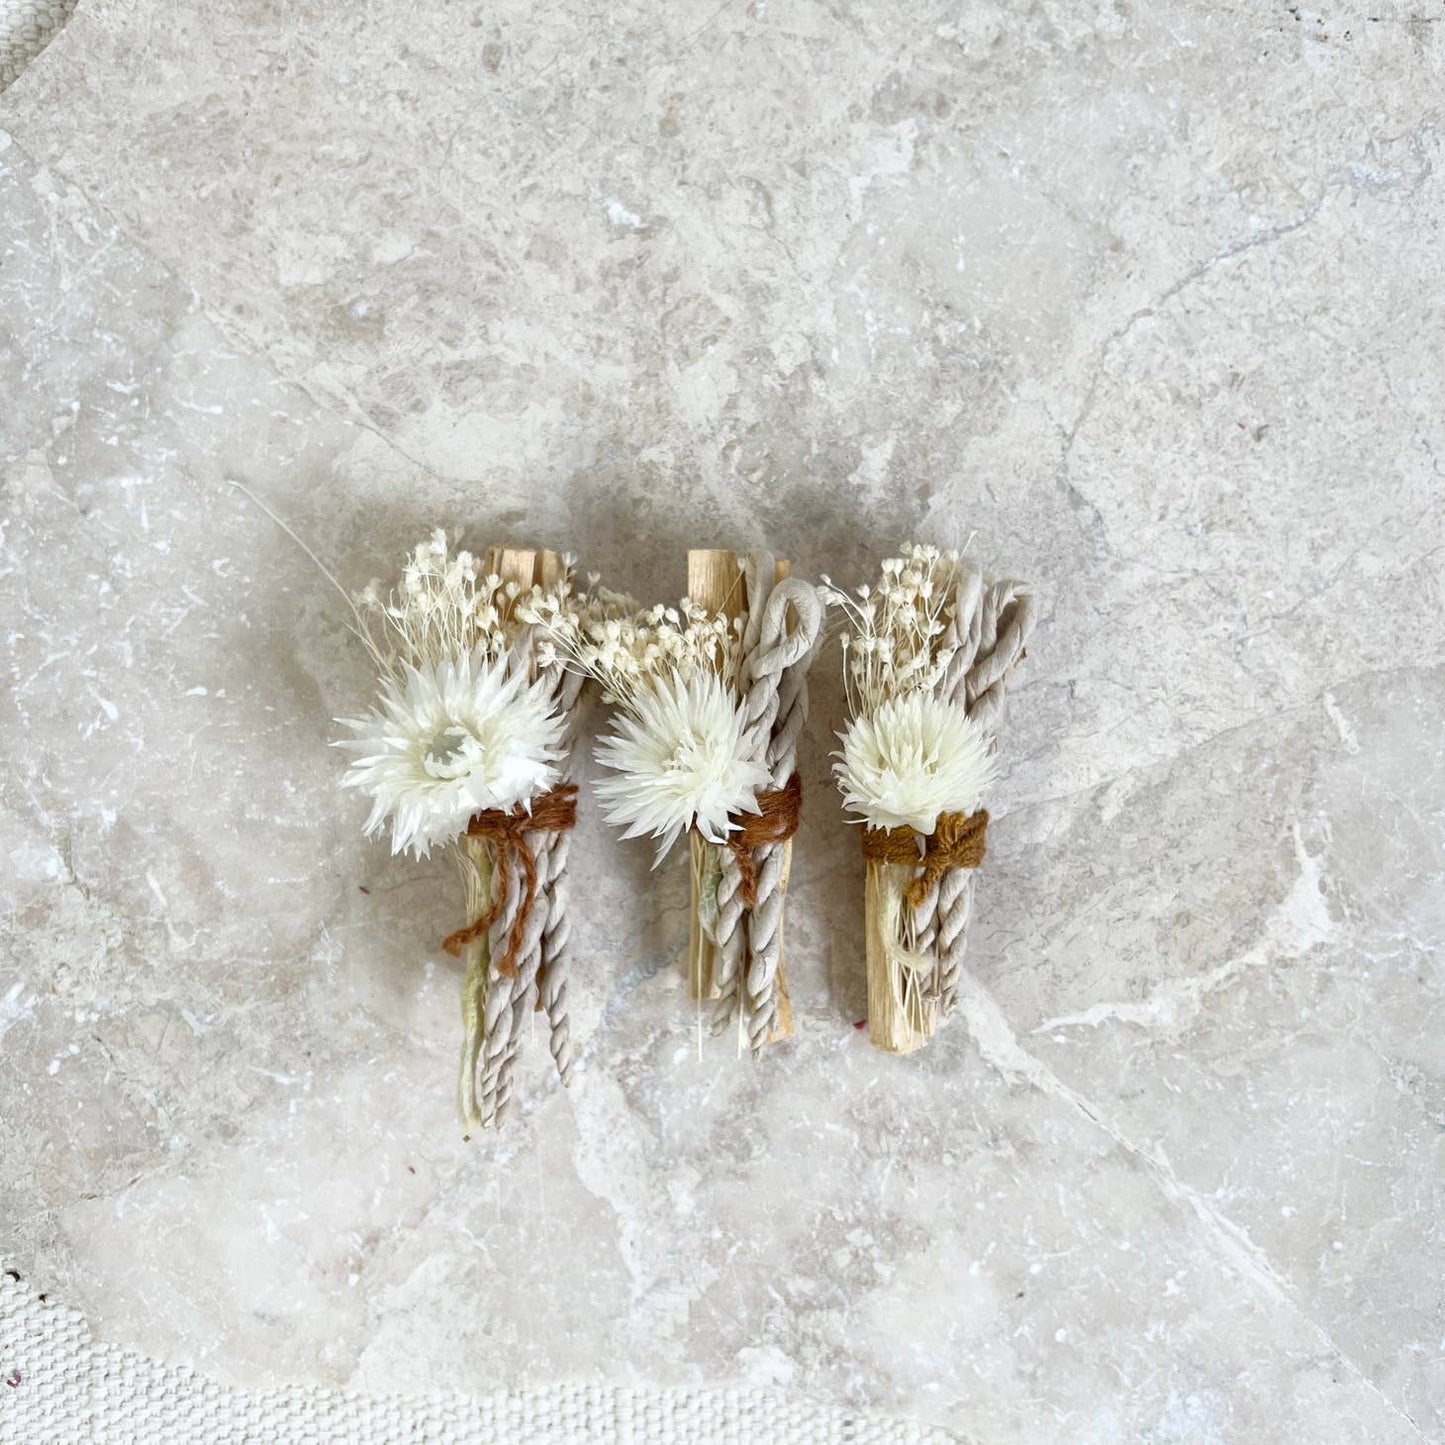 Palo santo bundle with bleached starflowers, a pretty strawflower and three rope incense braids, all wrapped with vintage string. These all white, neutral bundles are limited edition. Perfect for the first snow fall and winter solstice. / solstice moon bundle by catherine rising